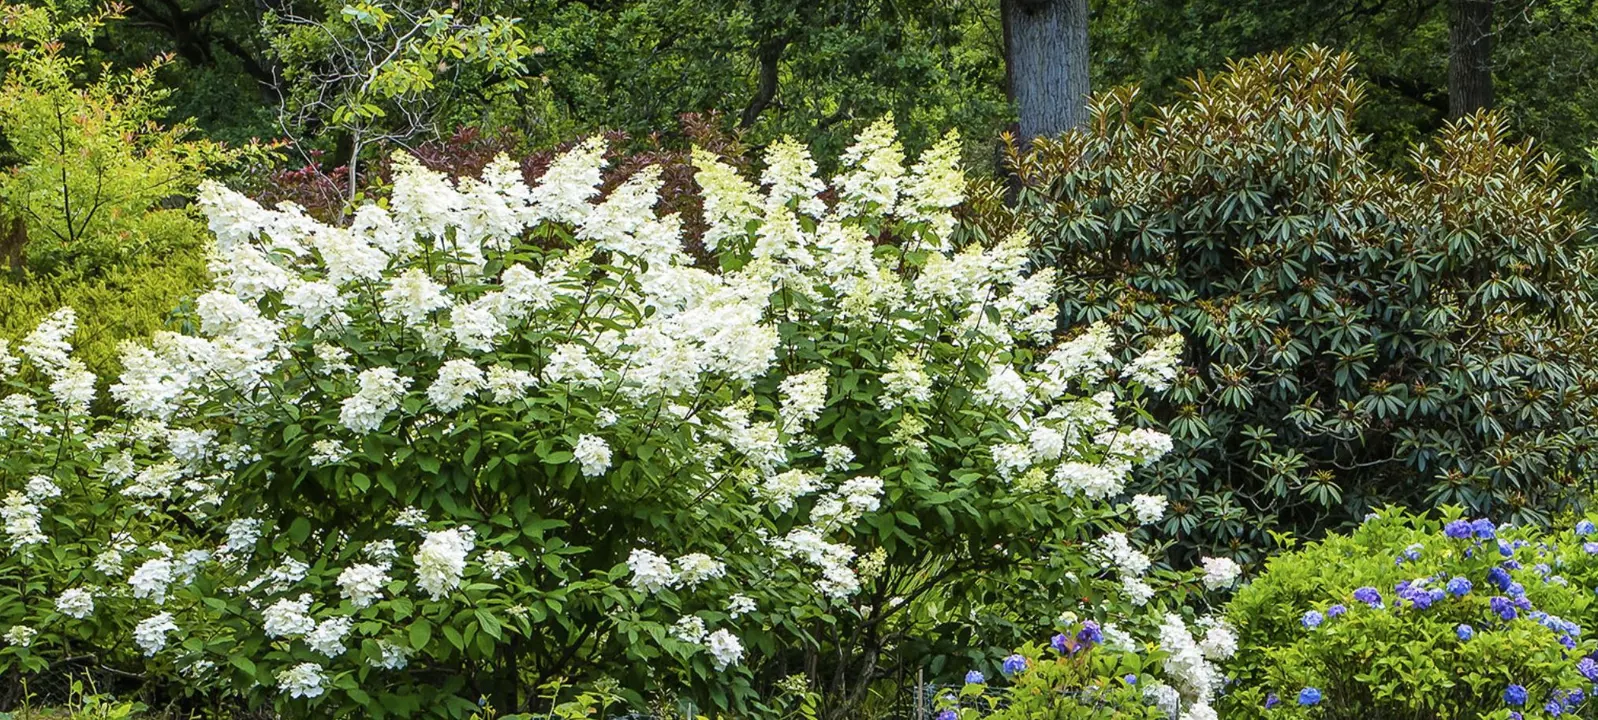 Hydrangeas and Rhododendrons in a border